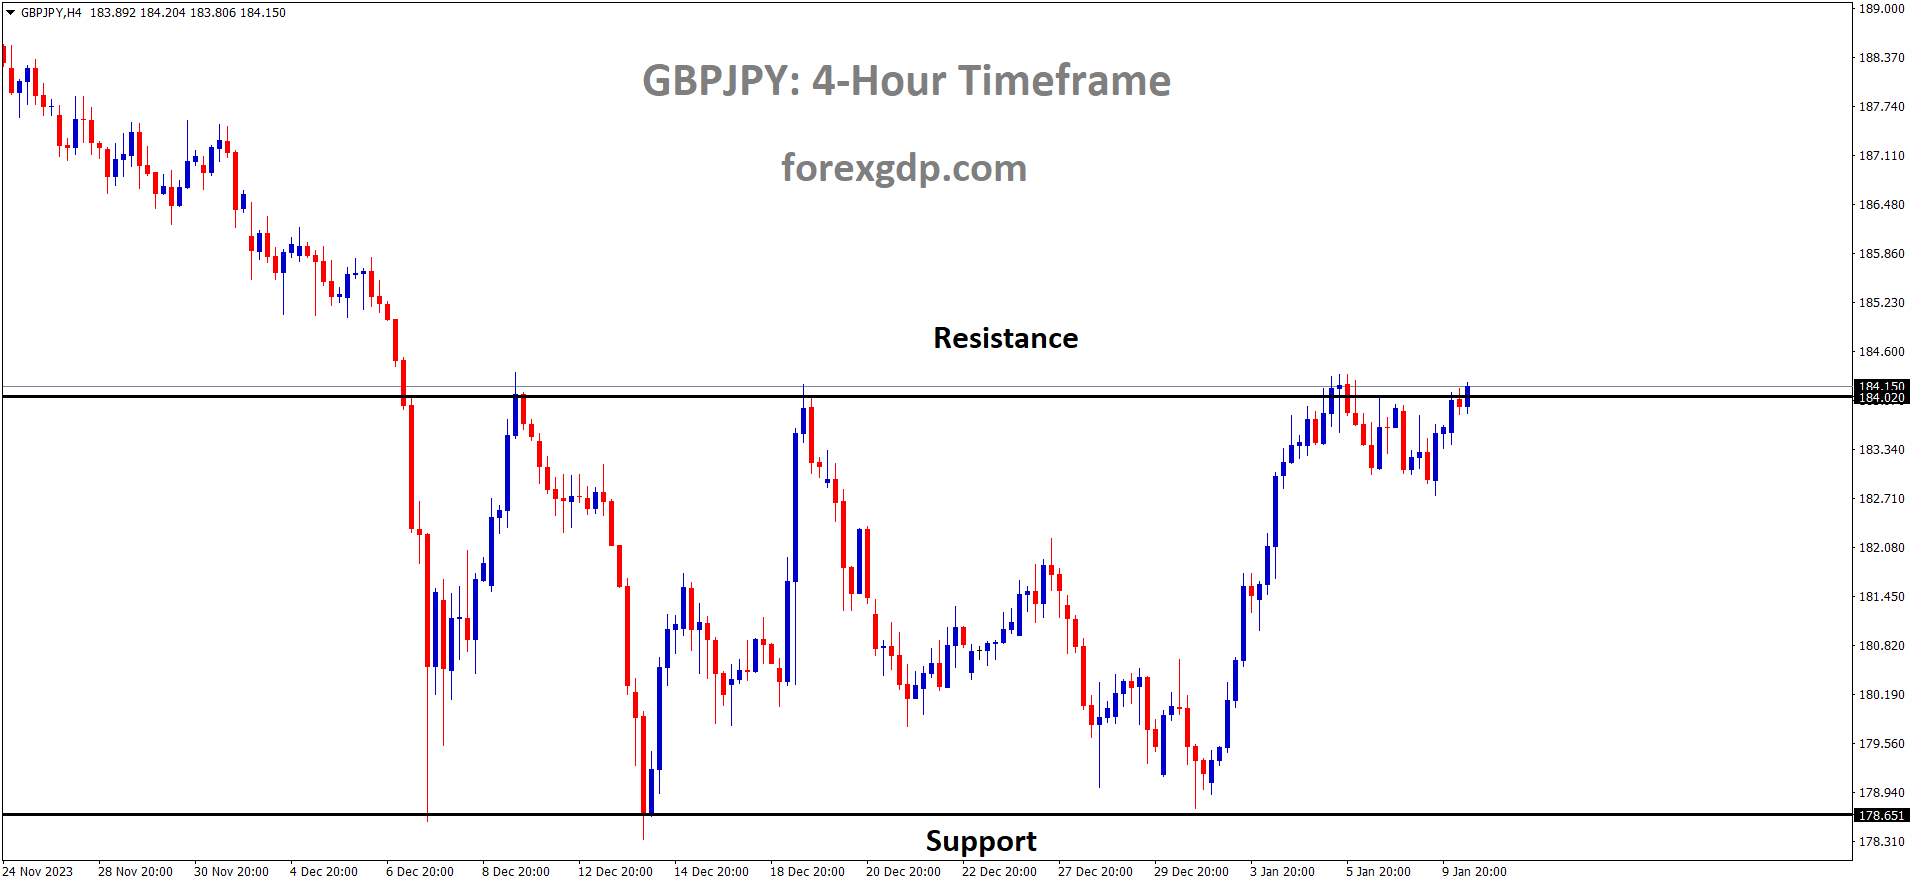 GBPJPY is moving in the Box pattern and the market has reached the resistance area of the pattern